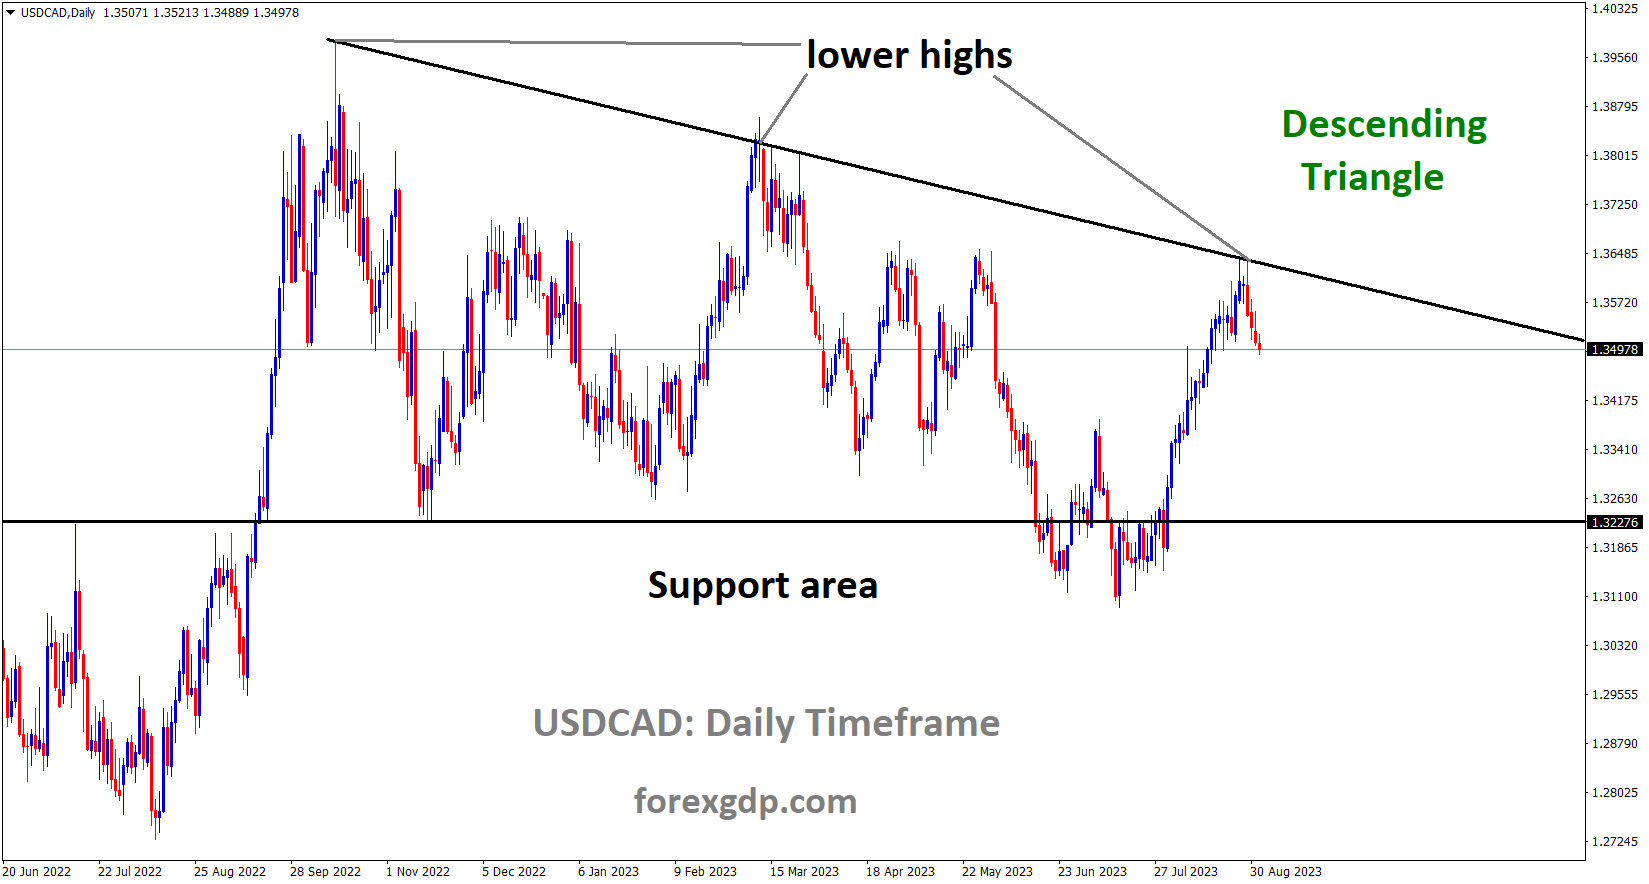 USDCAD is moving in the Descending triangle pattern and the market has fallen from the lower high area of the pattern